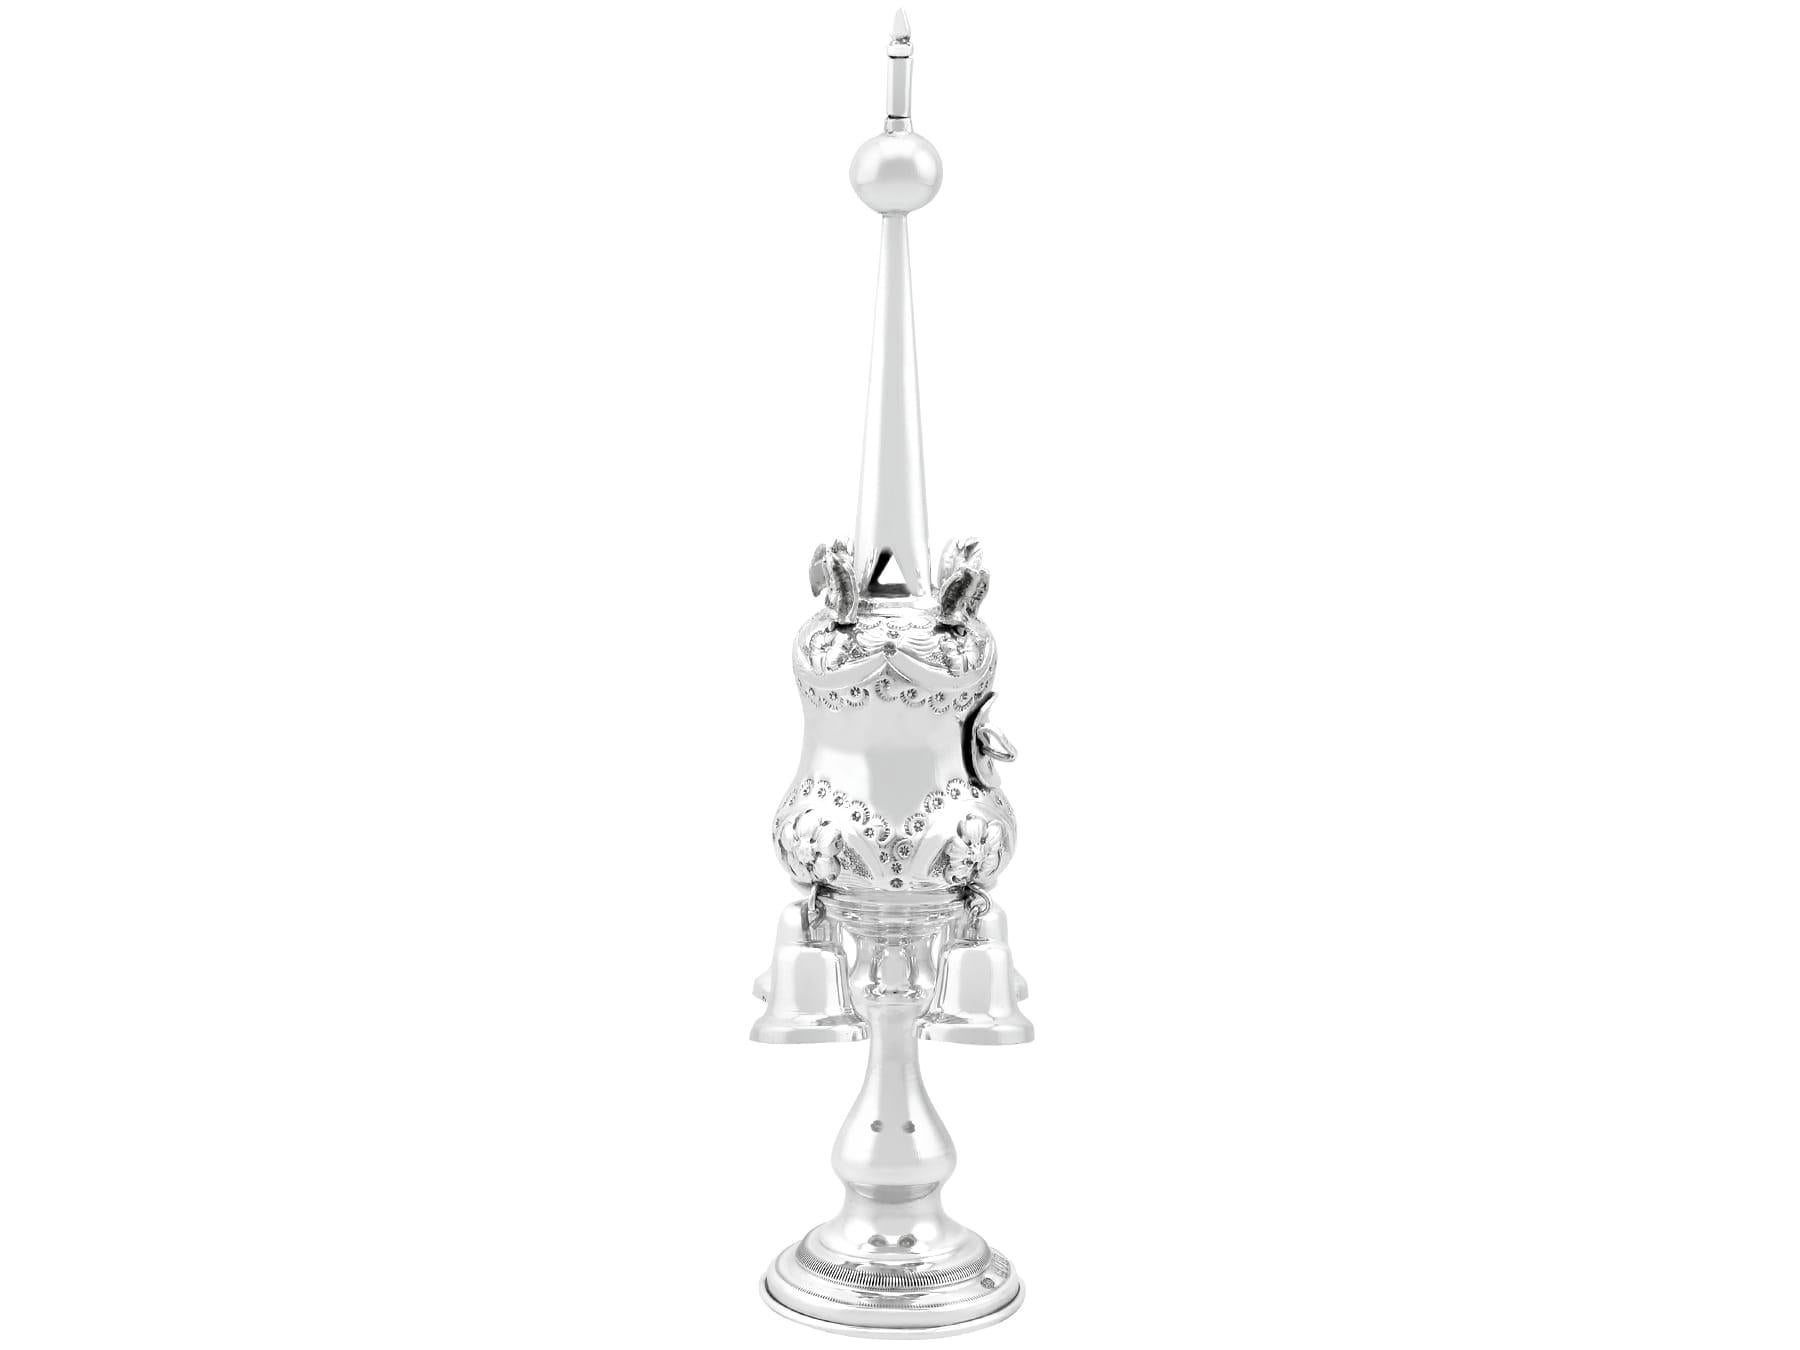 English Antique 1915 Sterling Silver Spice Tower For Sale